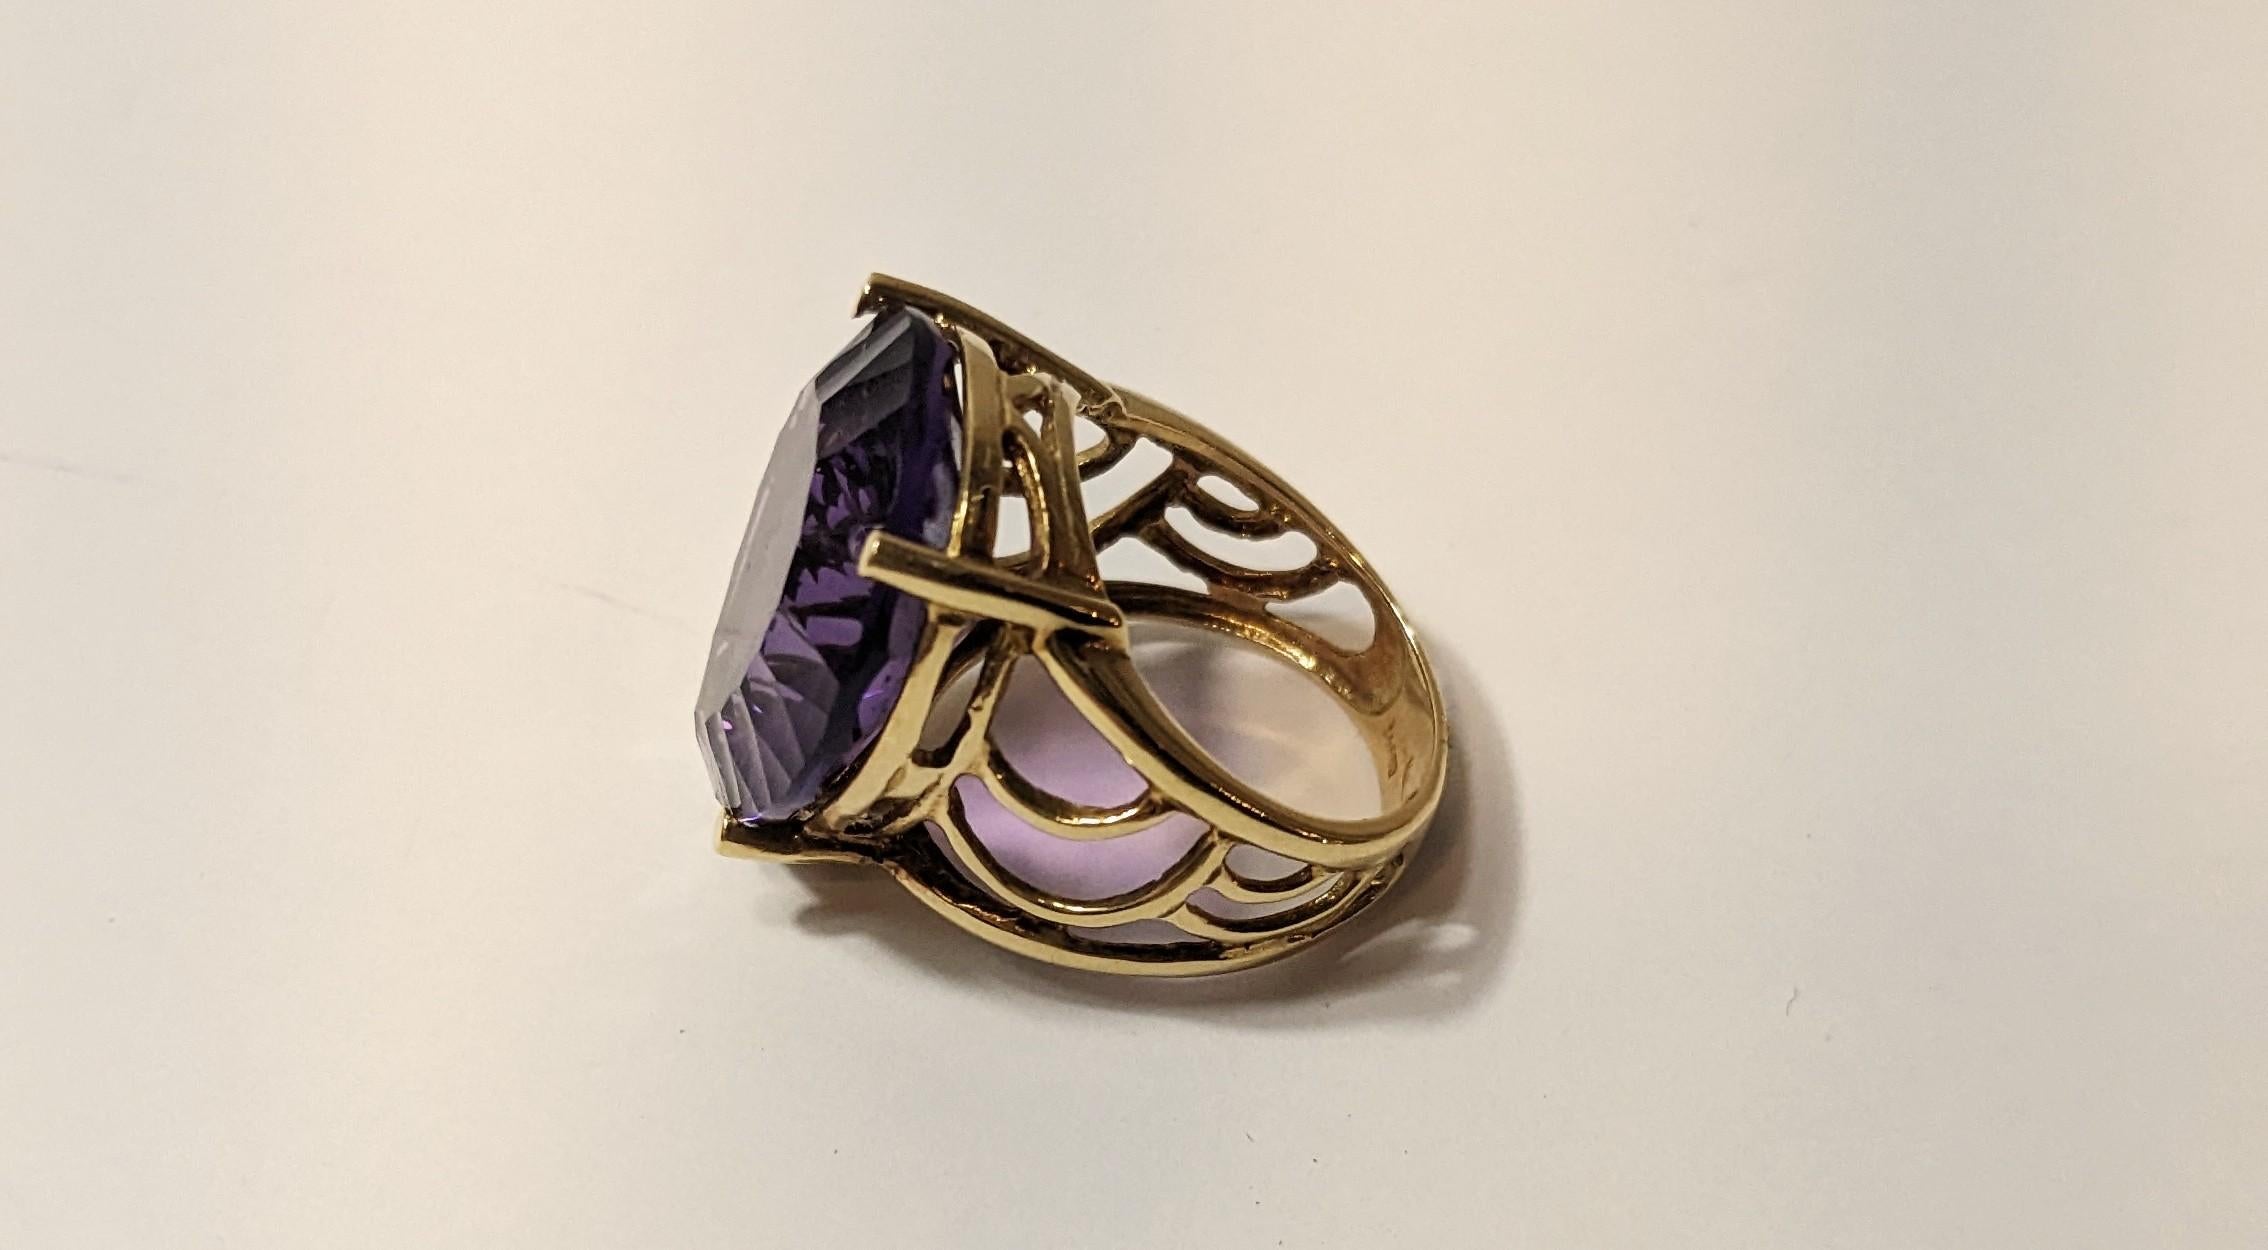 Brilliant Cut Ring 18k Yellow Gold with Violet Quartz For Sale